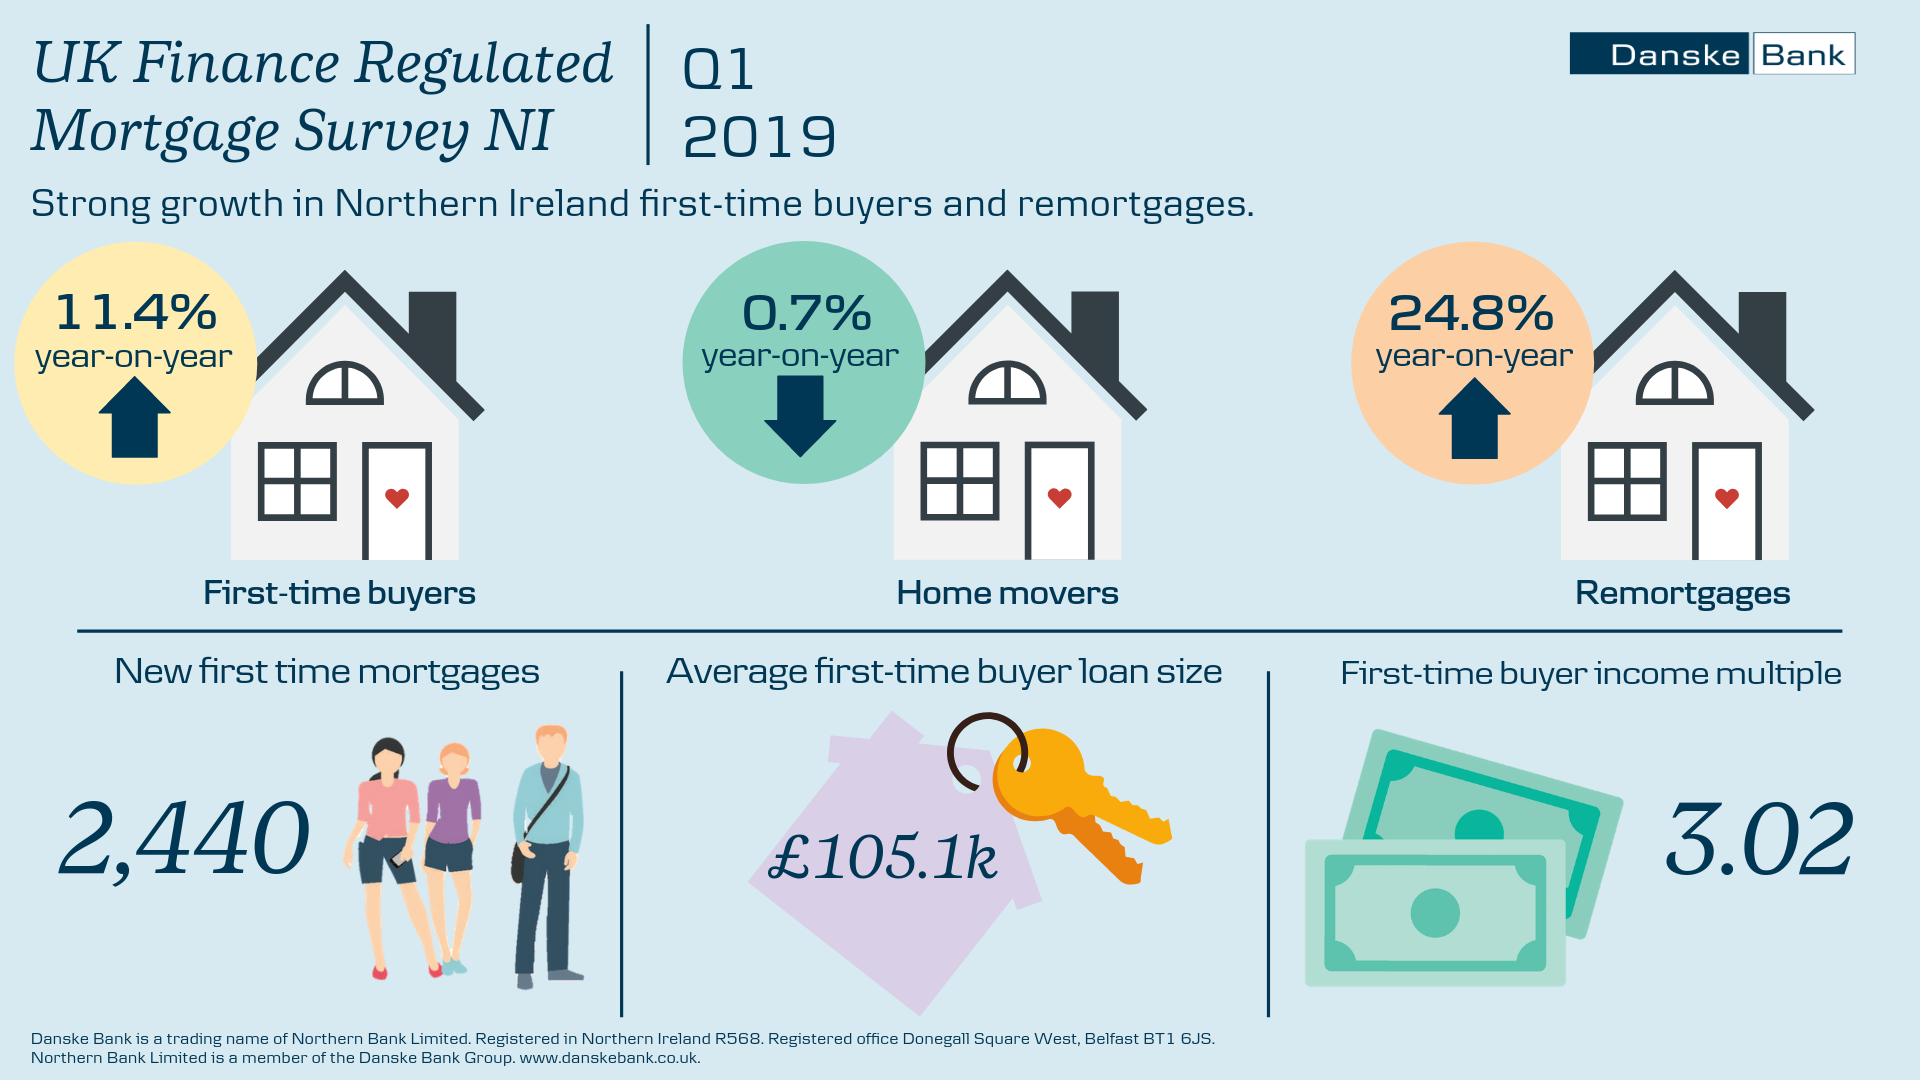 Infographic showing key statistics from the UK Finance Regulated Mortgage Survey NI Q1 2019.